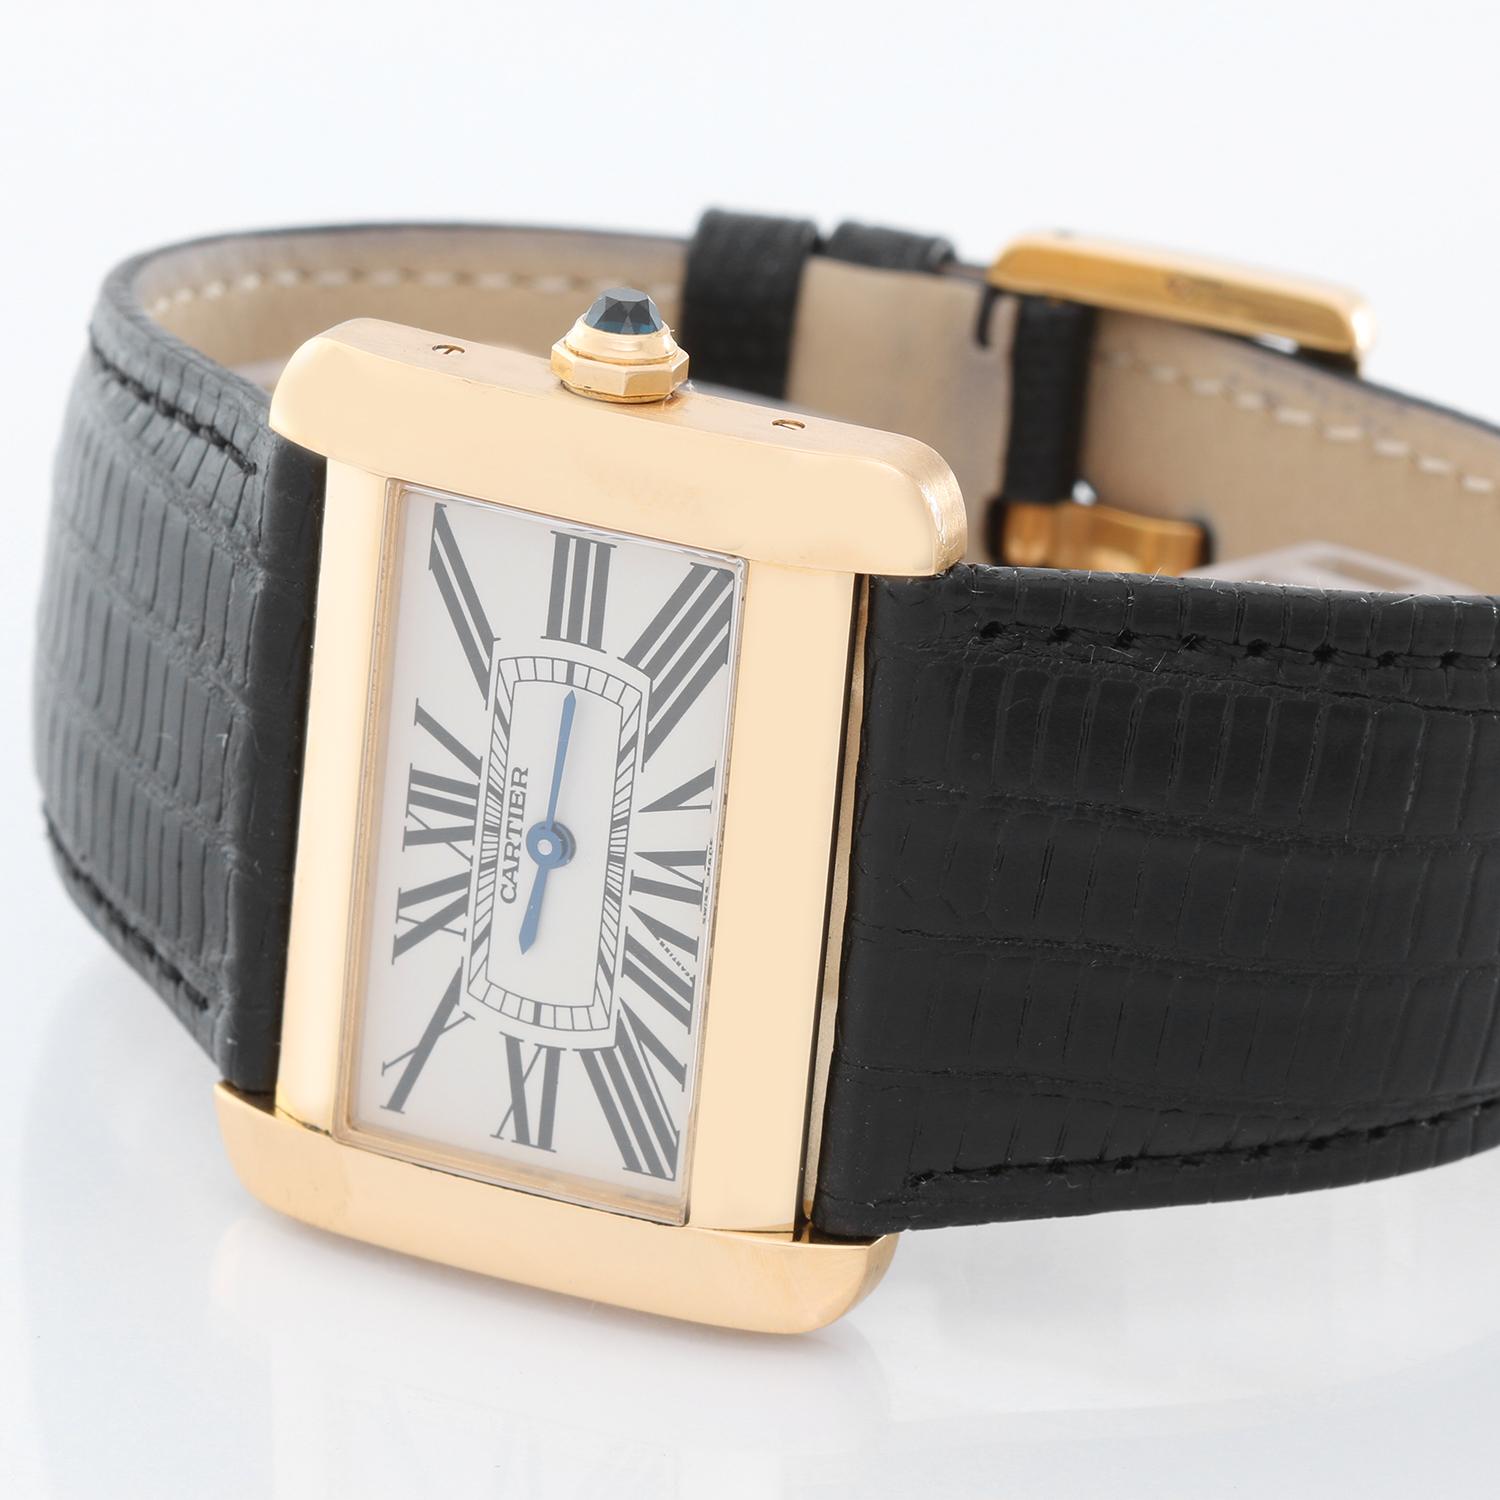 Cartier Tank Divan 18K Yellow Gold Watch W6300556 - Quartz movement. 18k yellow gold case (38mm x 30mm). Silvered guilloche dial with black Roman numerals. Cartier black leather strap. Pre-owned with custom box .